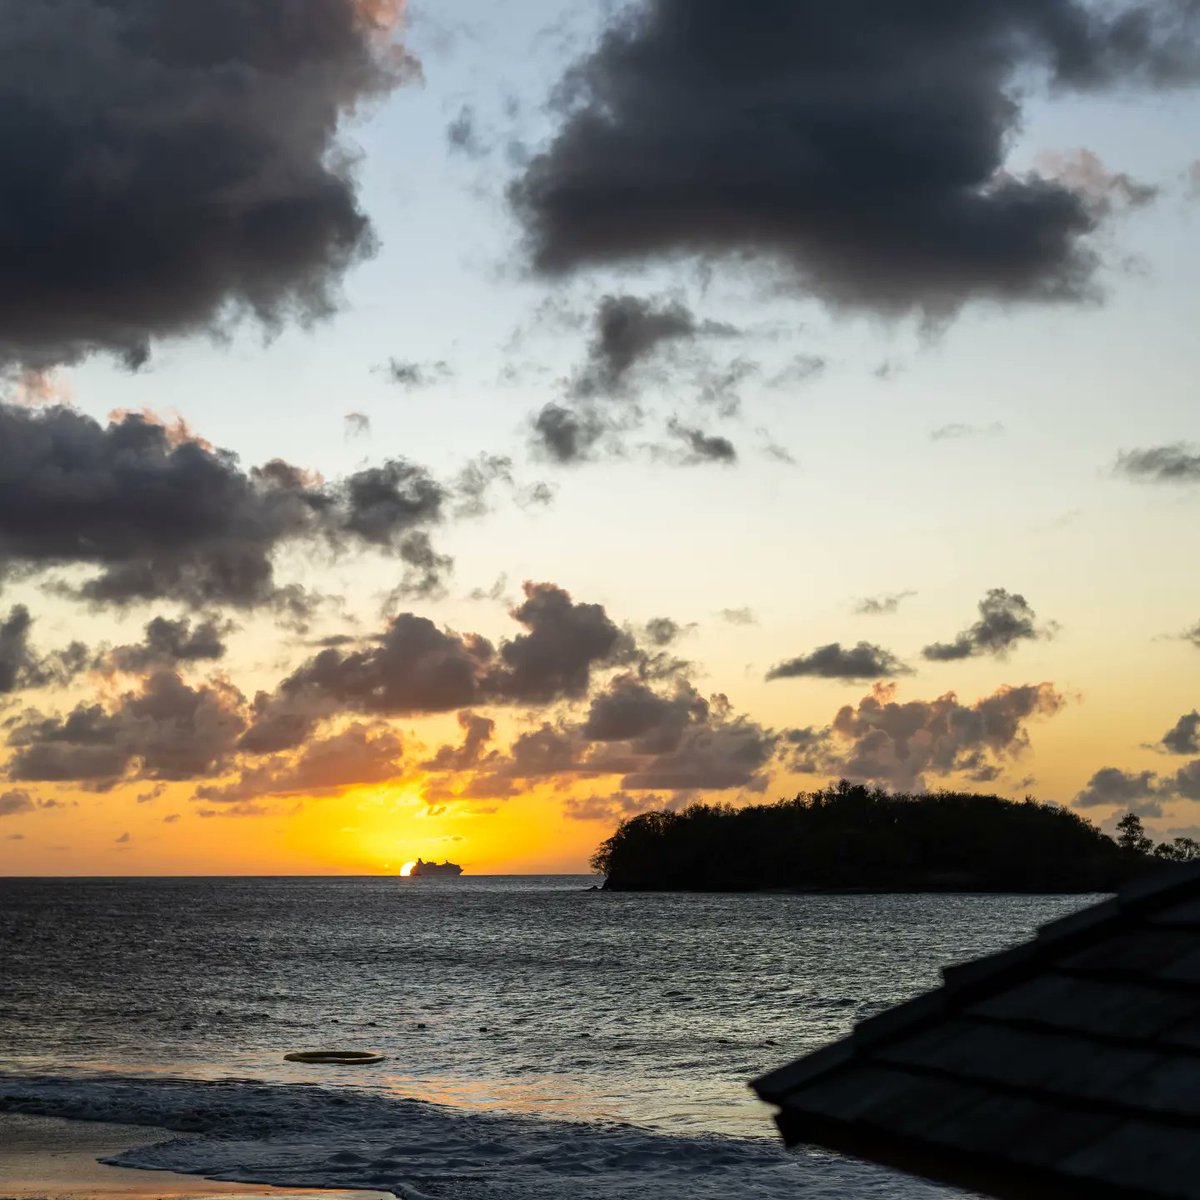 Sunset shot from our lovely honeymoon at Sandals Halcyon Beach in St Lucia. 
.
.
.
.
#landscapephotography #stlucia #sharemondays2022 #Sunset #sandalshalcyonbeach